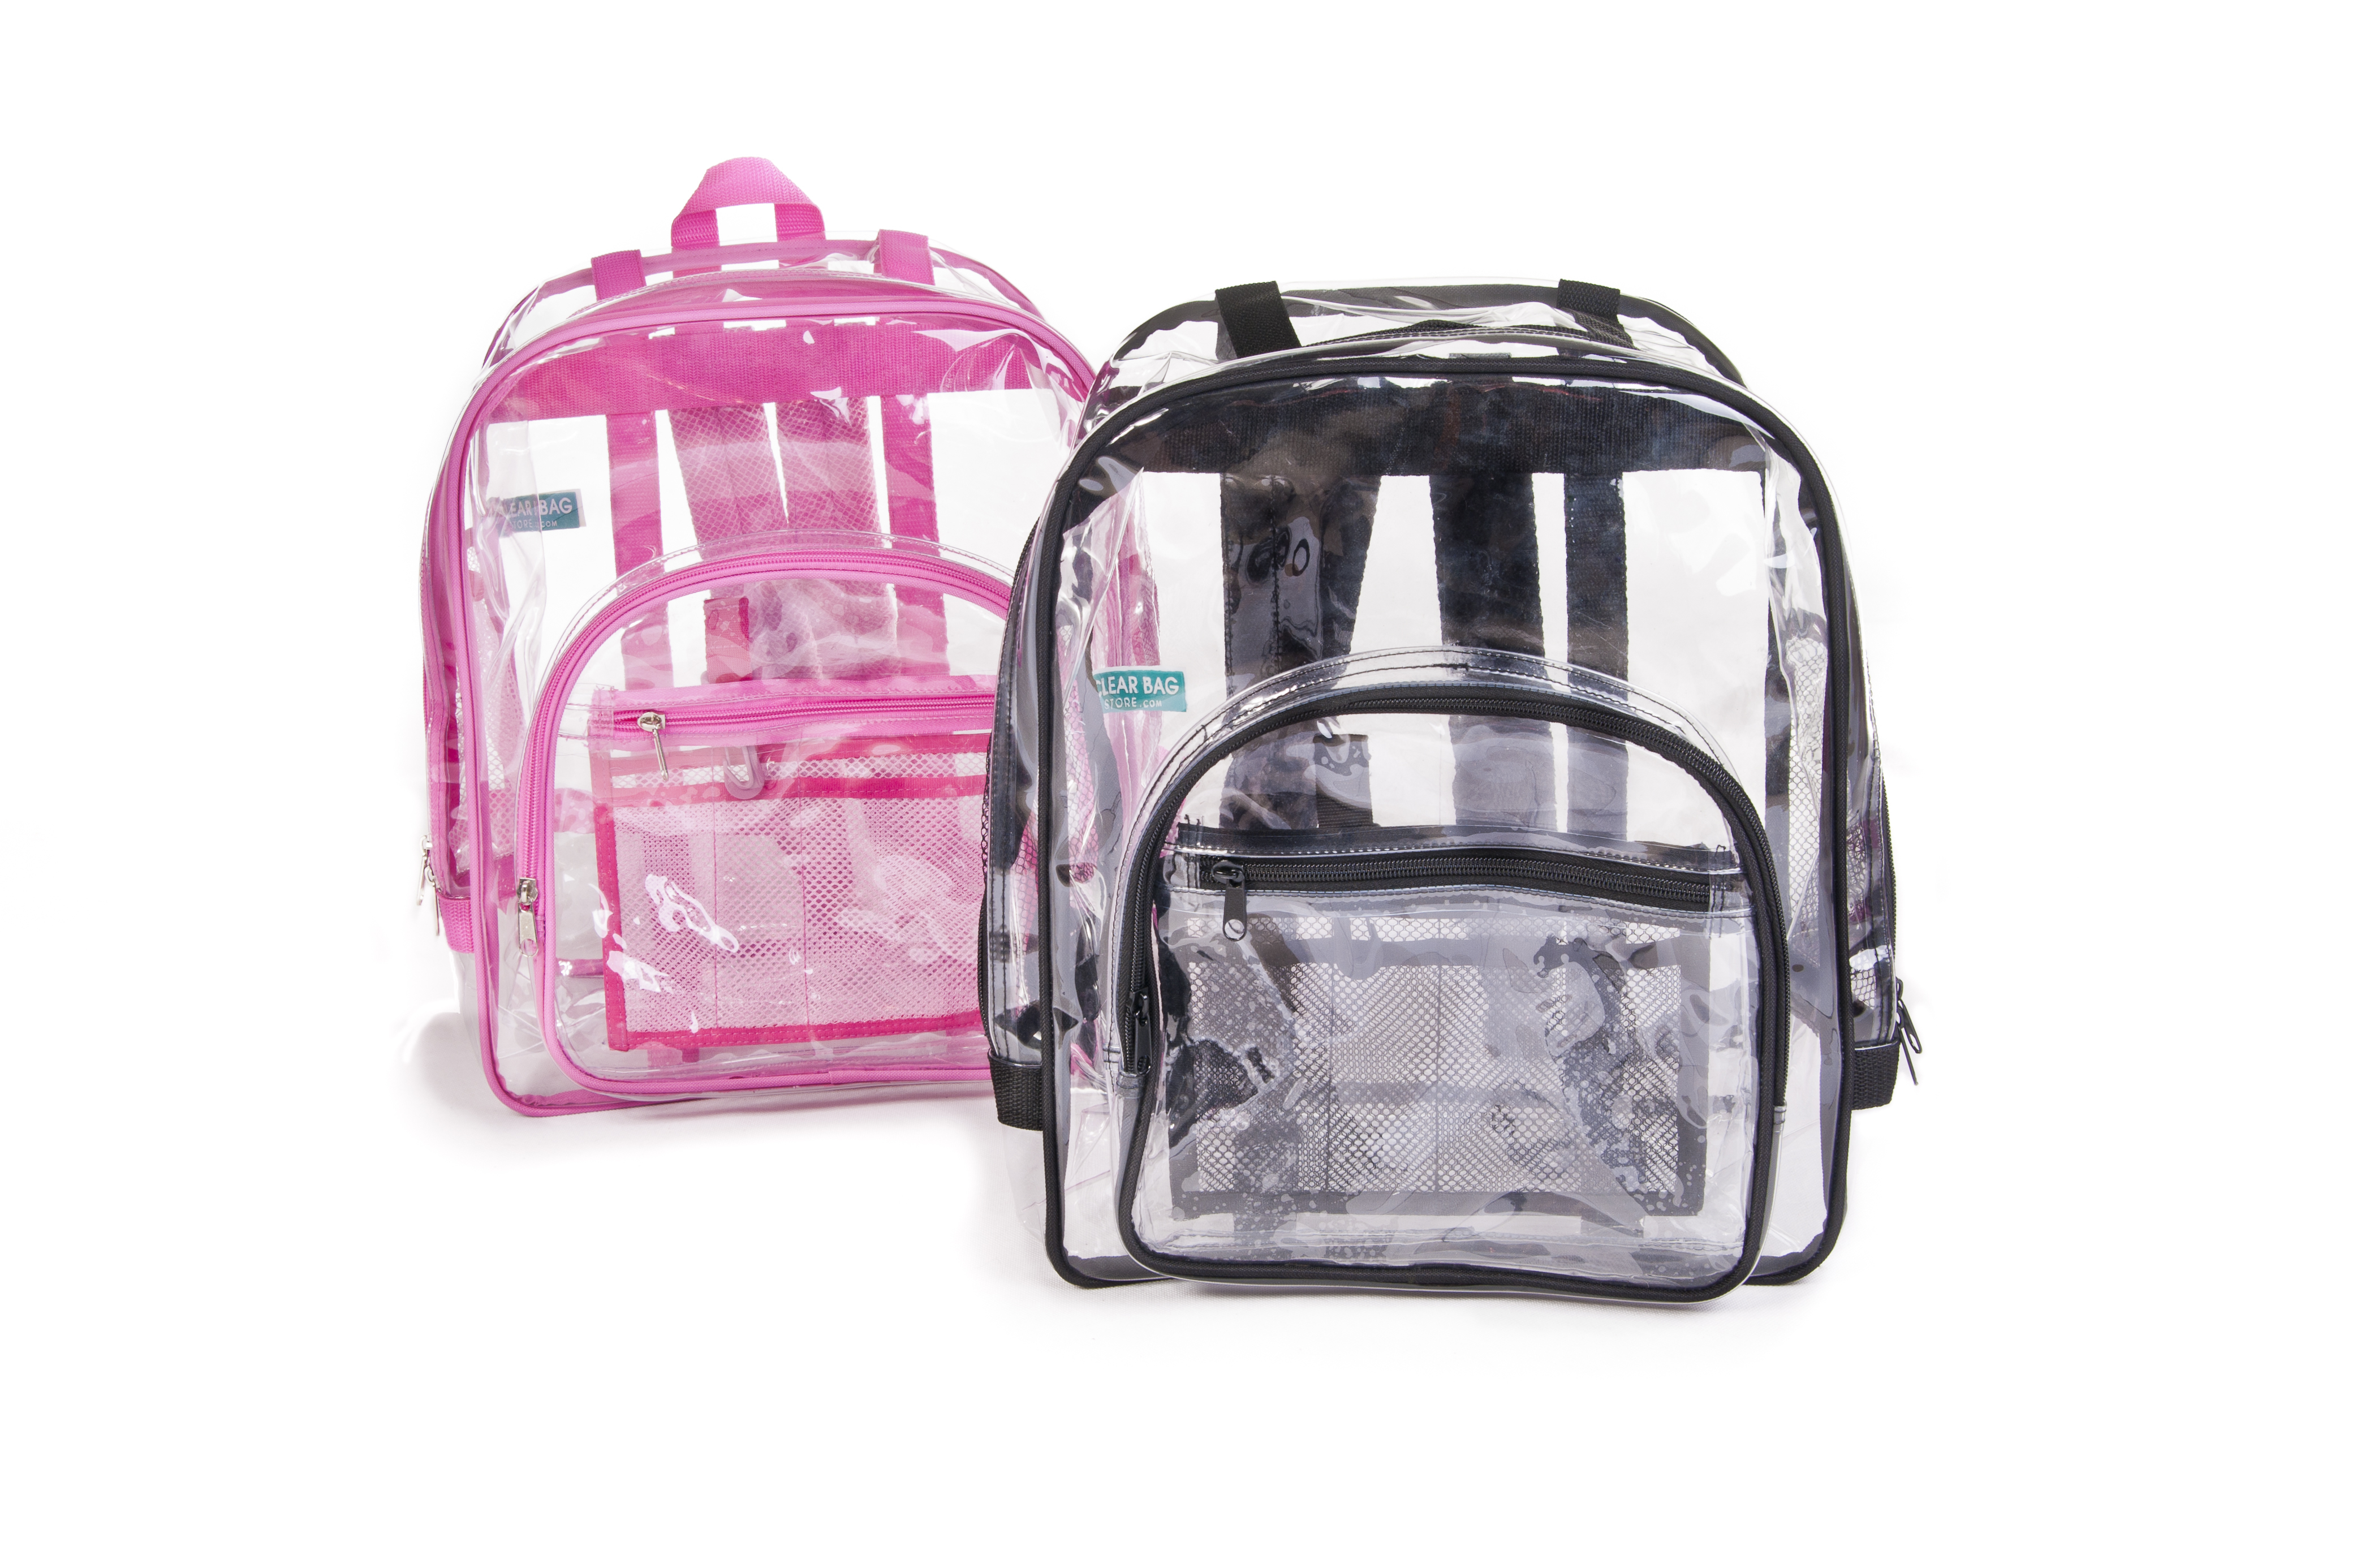 Clear Backpacks Wholesale- The Leading Authority - The Clear Bag Store